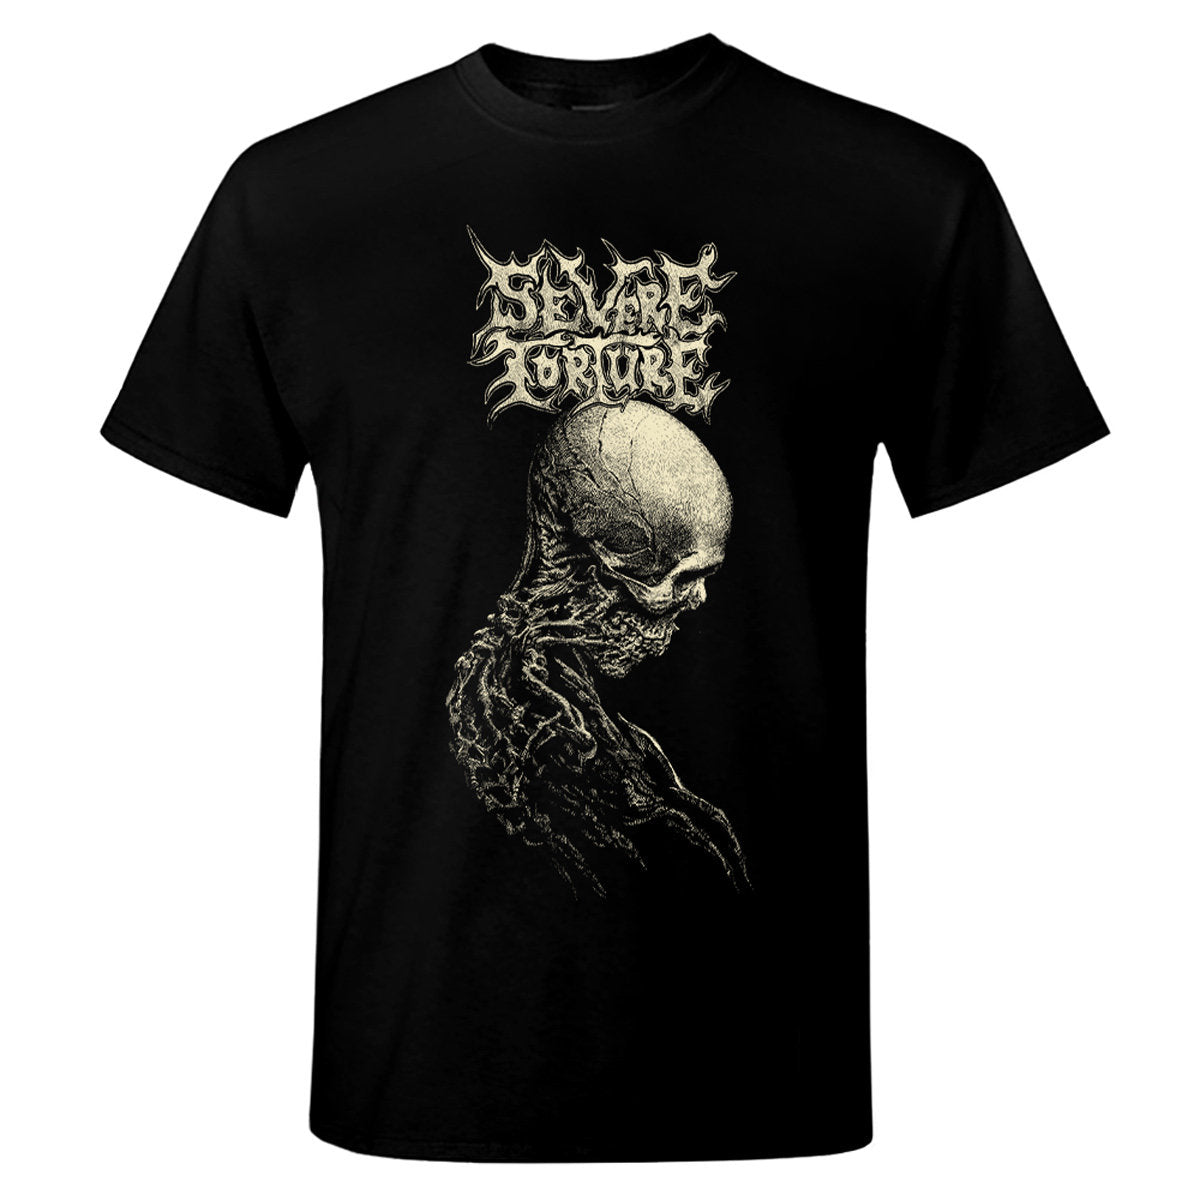 Severe Torture "Torn From The Jaws Of Death" T shirt